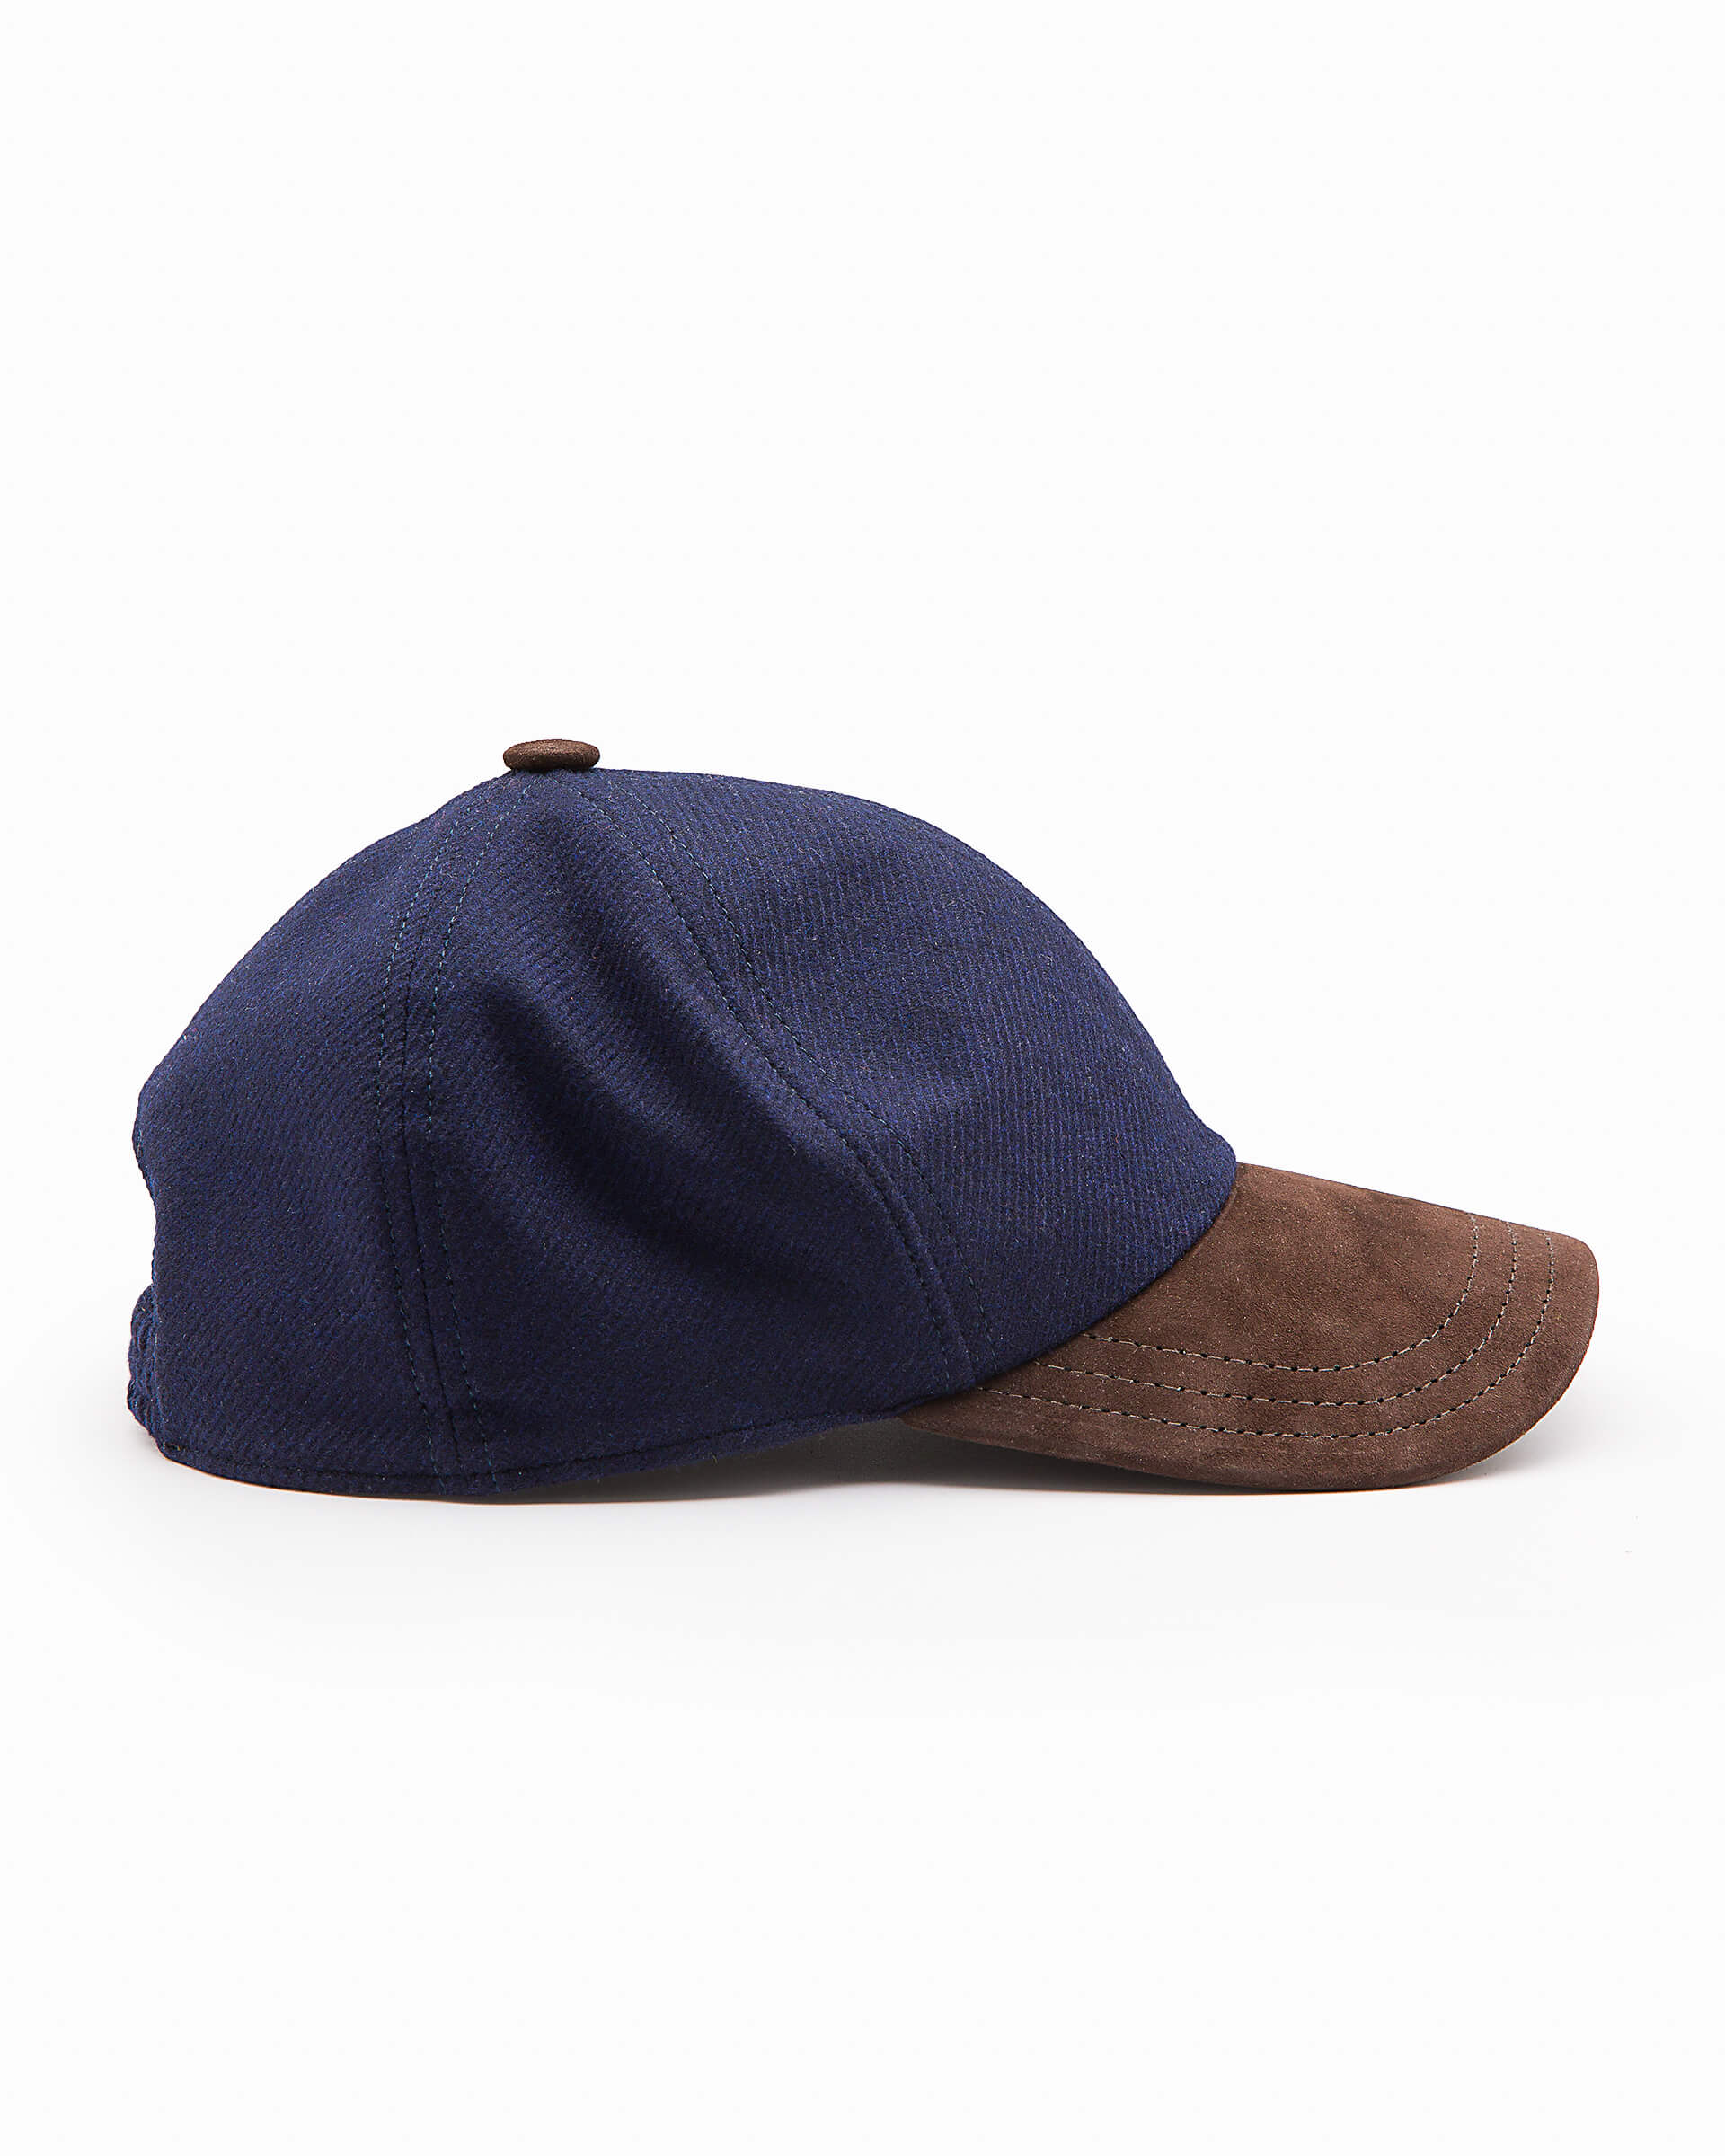 visor Ventura Firenze blue Baseball cap - hat cashmere of Andrea eclipse made water-repellent with